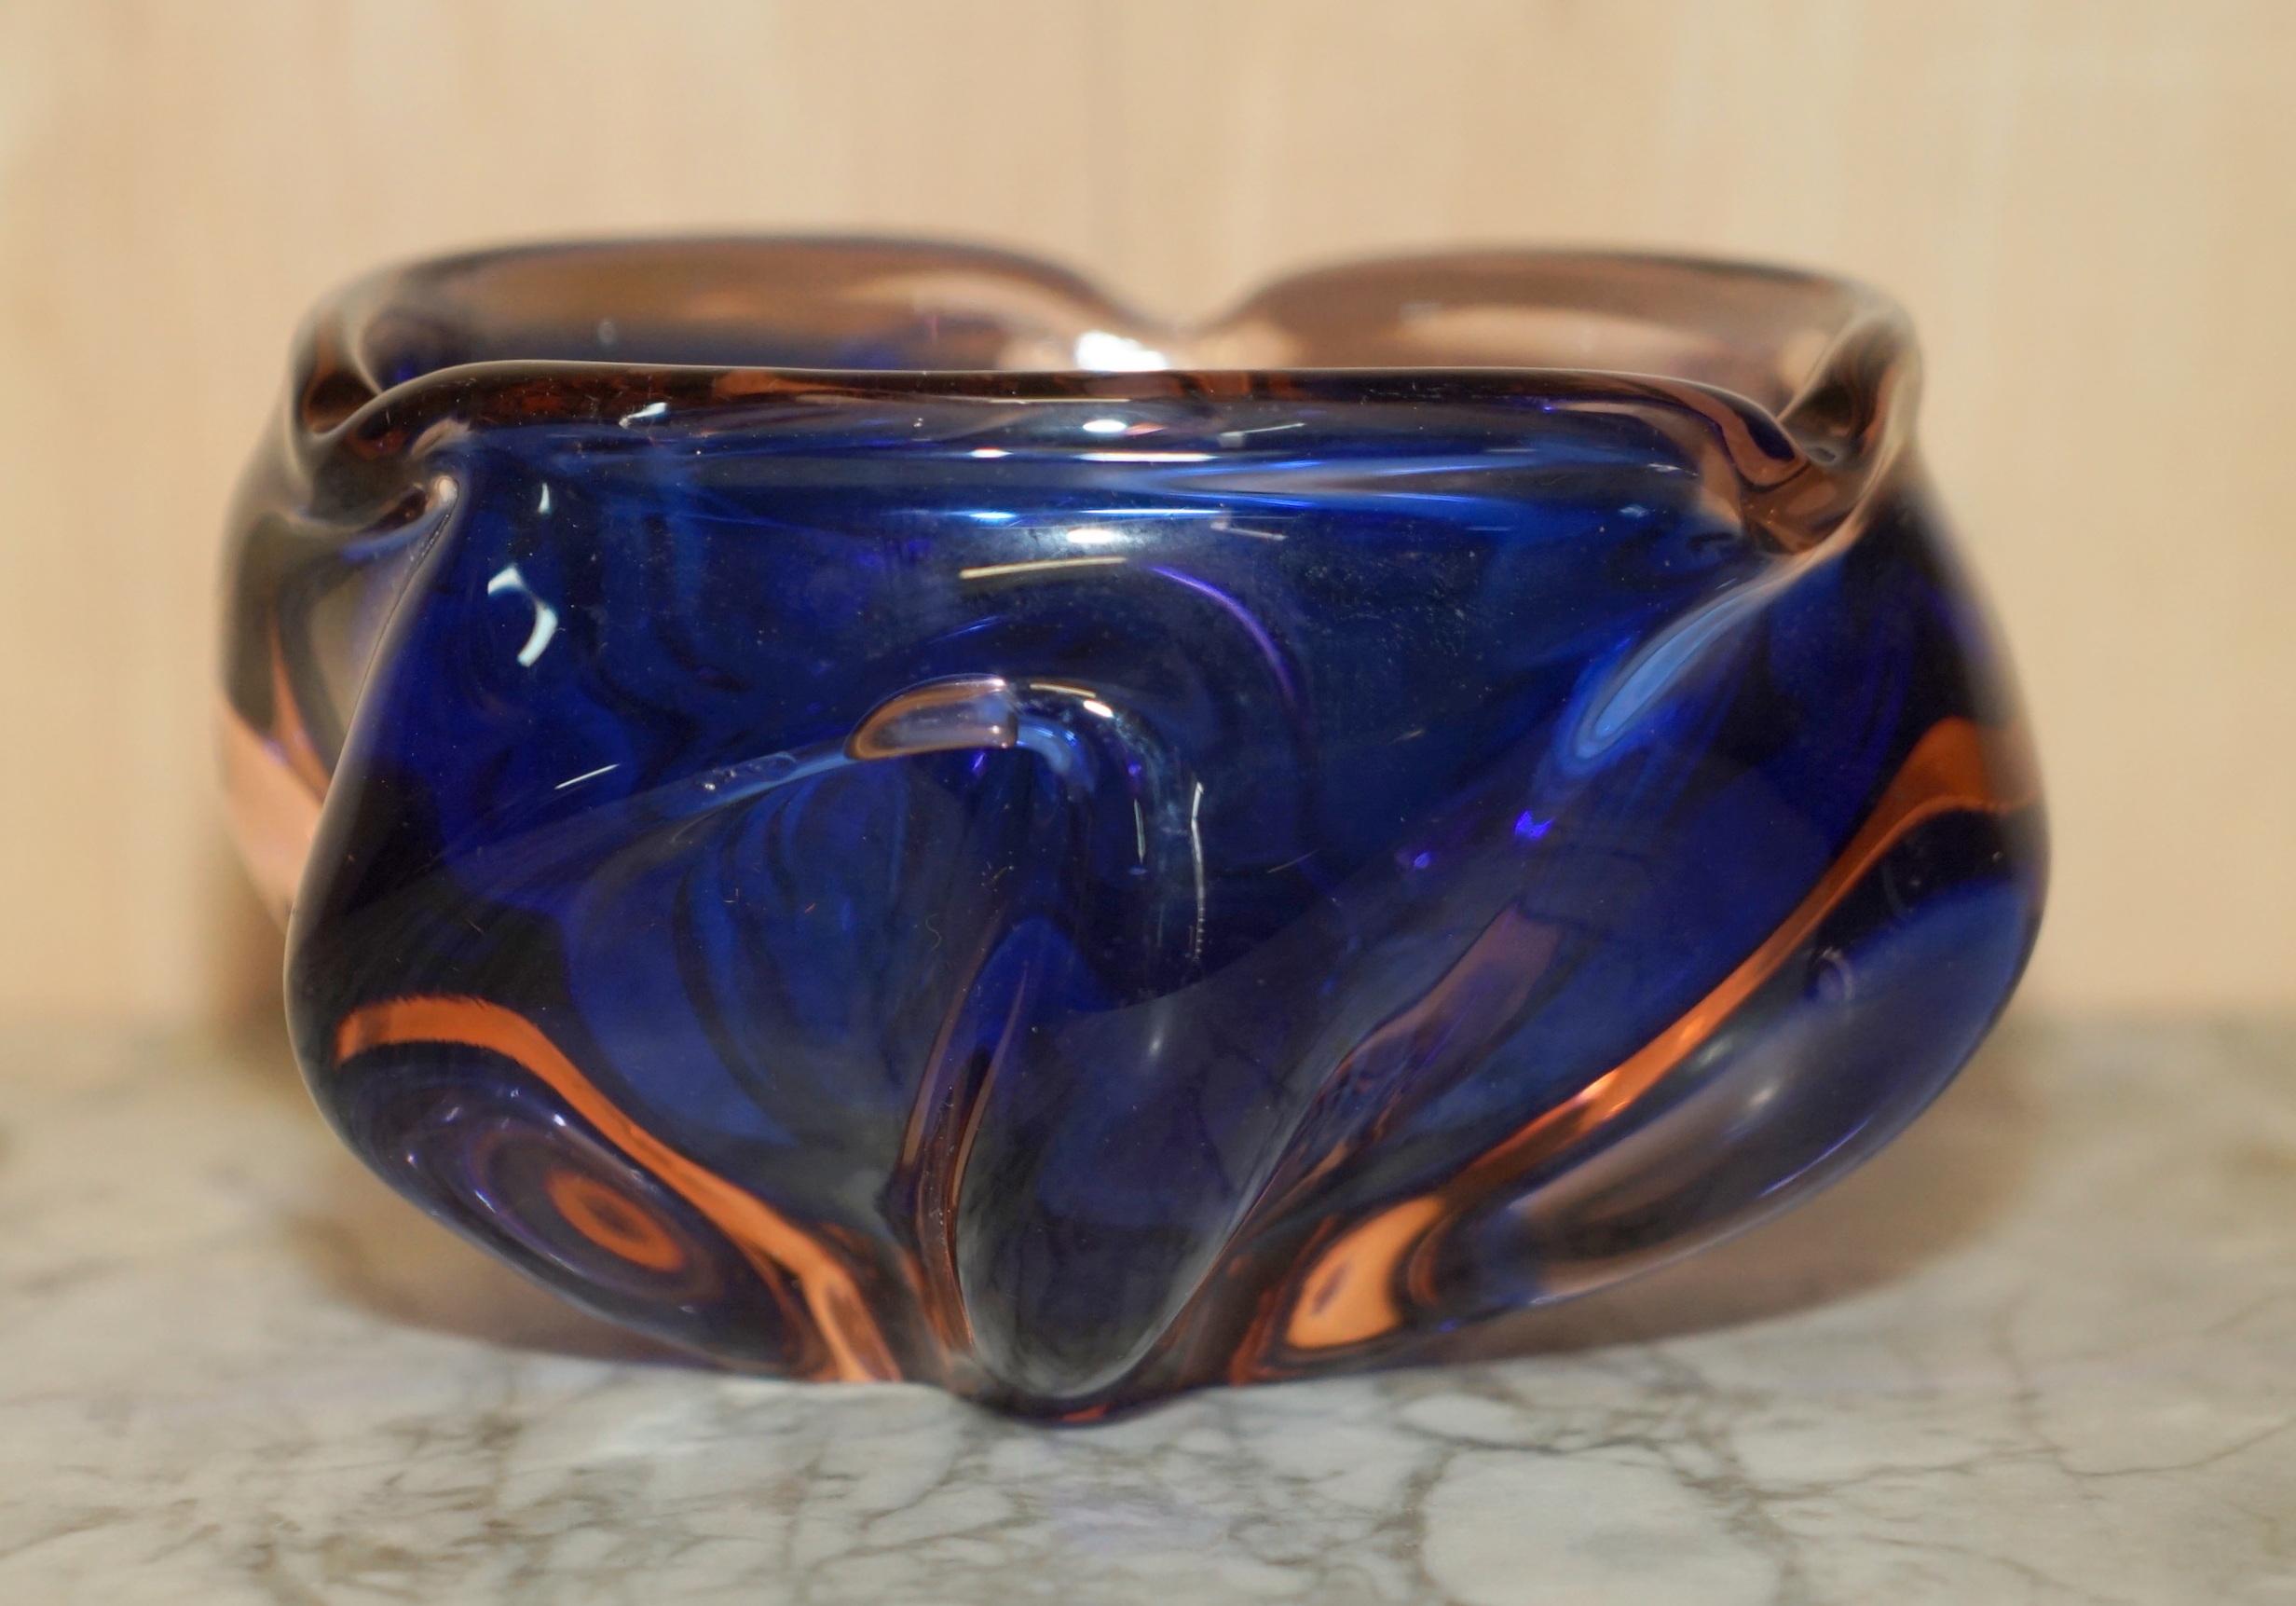 We are delighted to offer for sale this stunning one of a kind decorative floral affect glass bowl or dish.

This piece looks sublime from every angle, it doesn’t have any damage that I can see, it is very decorative and can be used for keys or